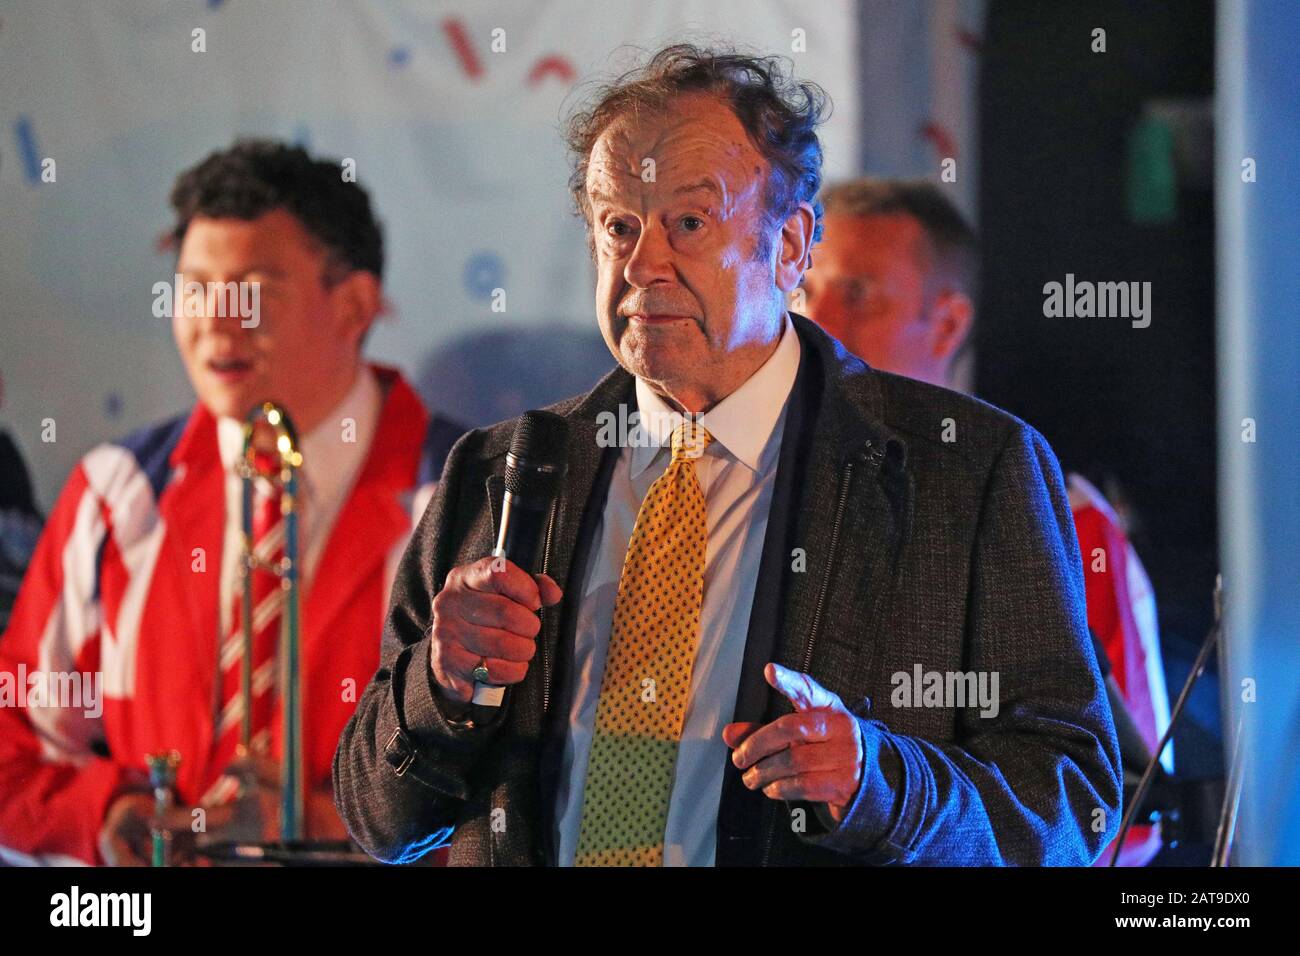 John Mills speaks to pro-Brexit supporters in Parliament Square, London, as the UK prepares to leave the European Union, ending 47 years of close and sometimes uncomfortable ties to Brussels. Stock Photo